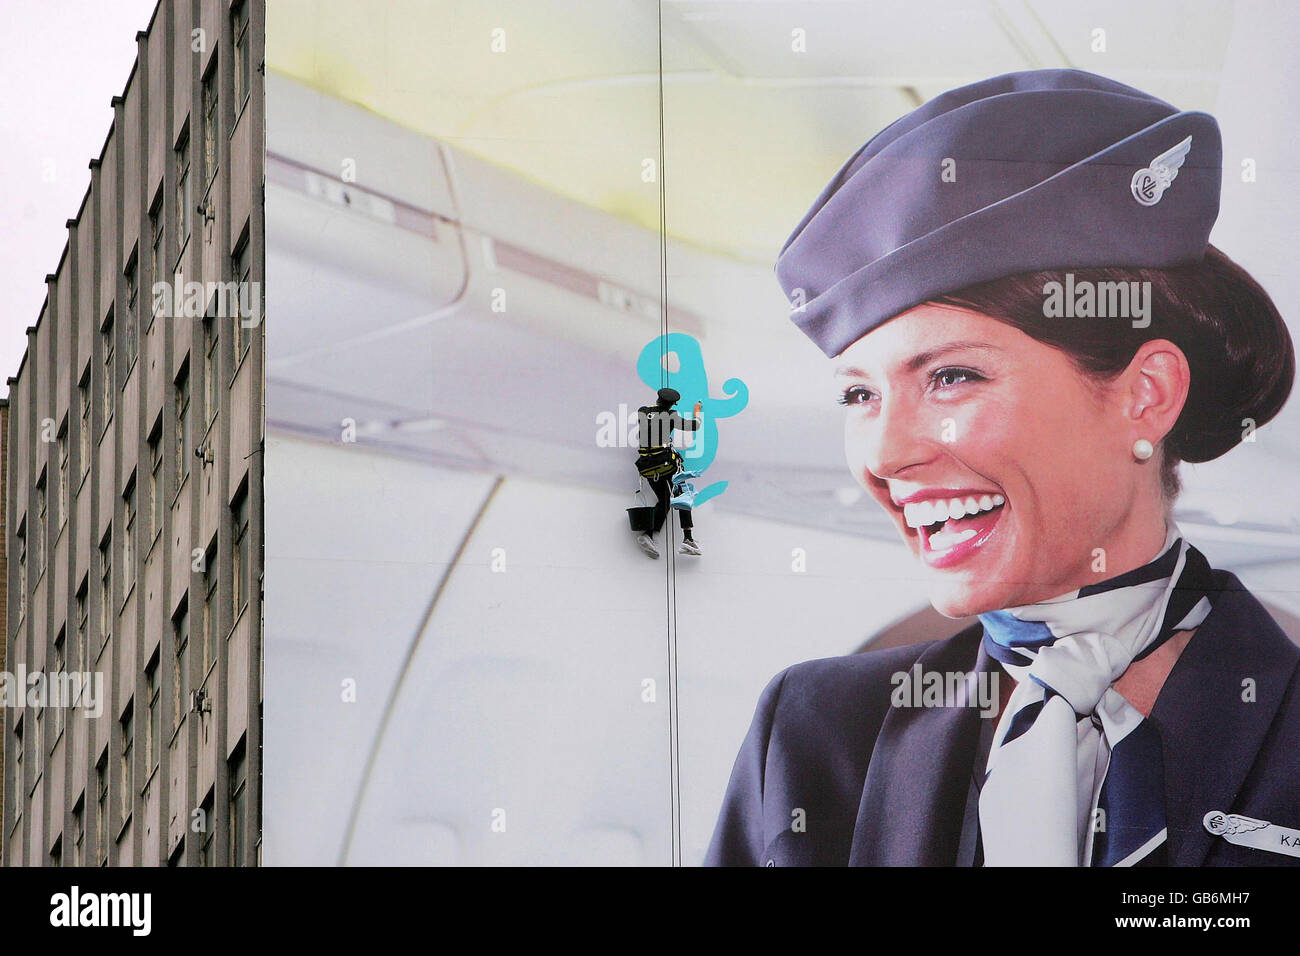 STANDALONE PHOTO Air New Zealand B747 Captain, Peter Clulow, abseils down a billboard to paint the slogan on the poster for the airline's latest advertising campaign in Aldgate, central London. Stock Photo